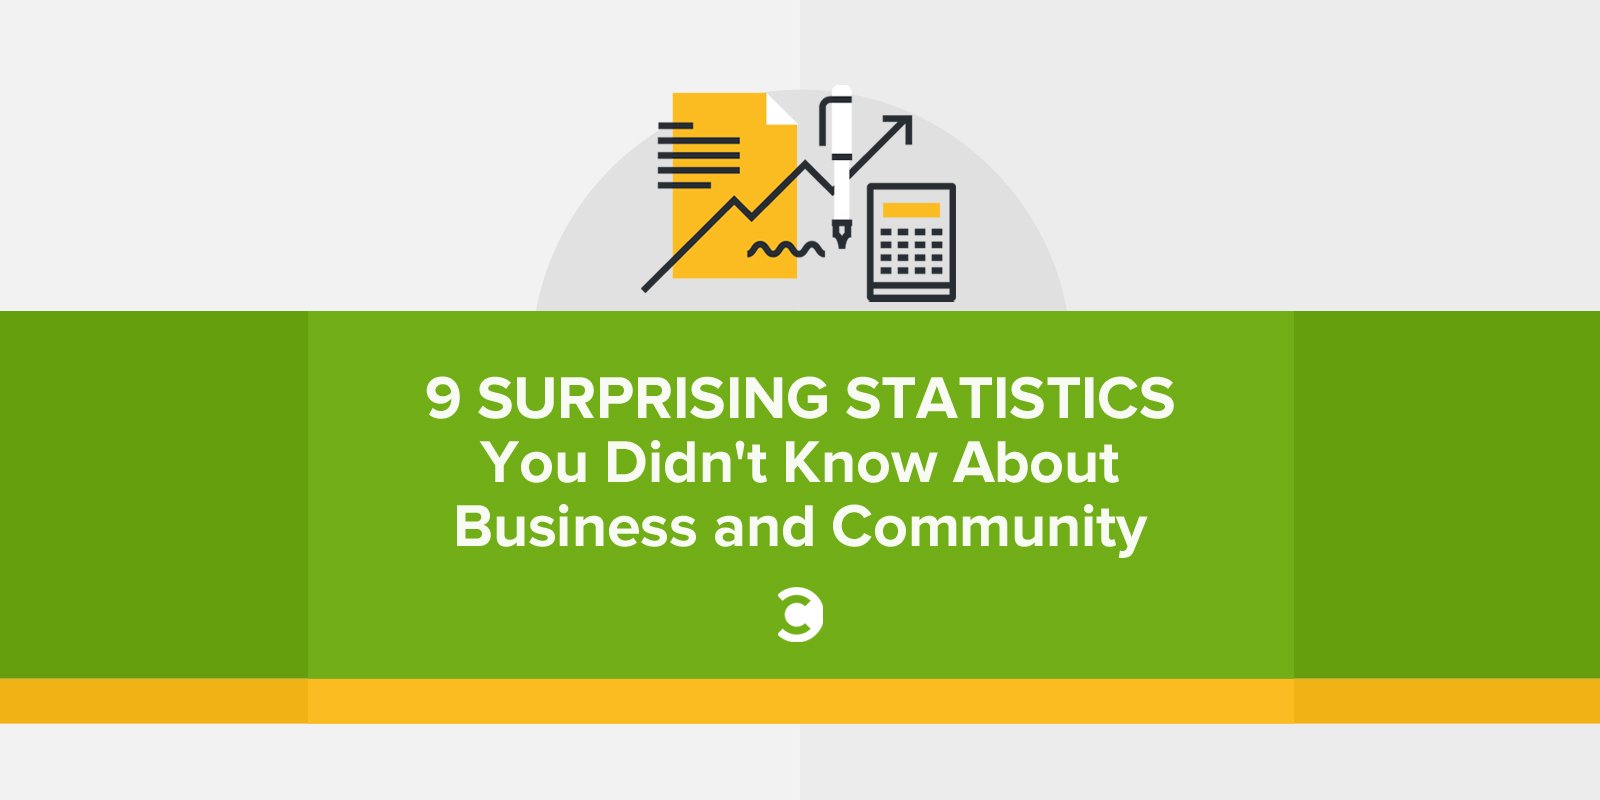 9 Surprising Statistics You Didn't Know About Business and Community